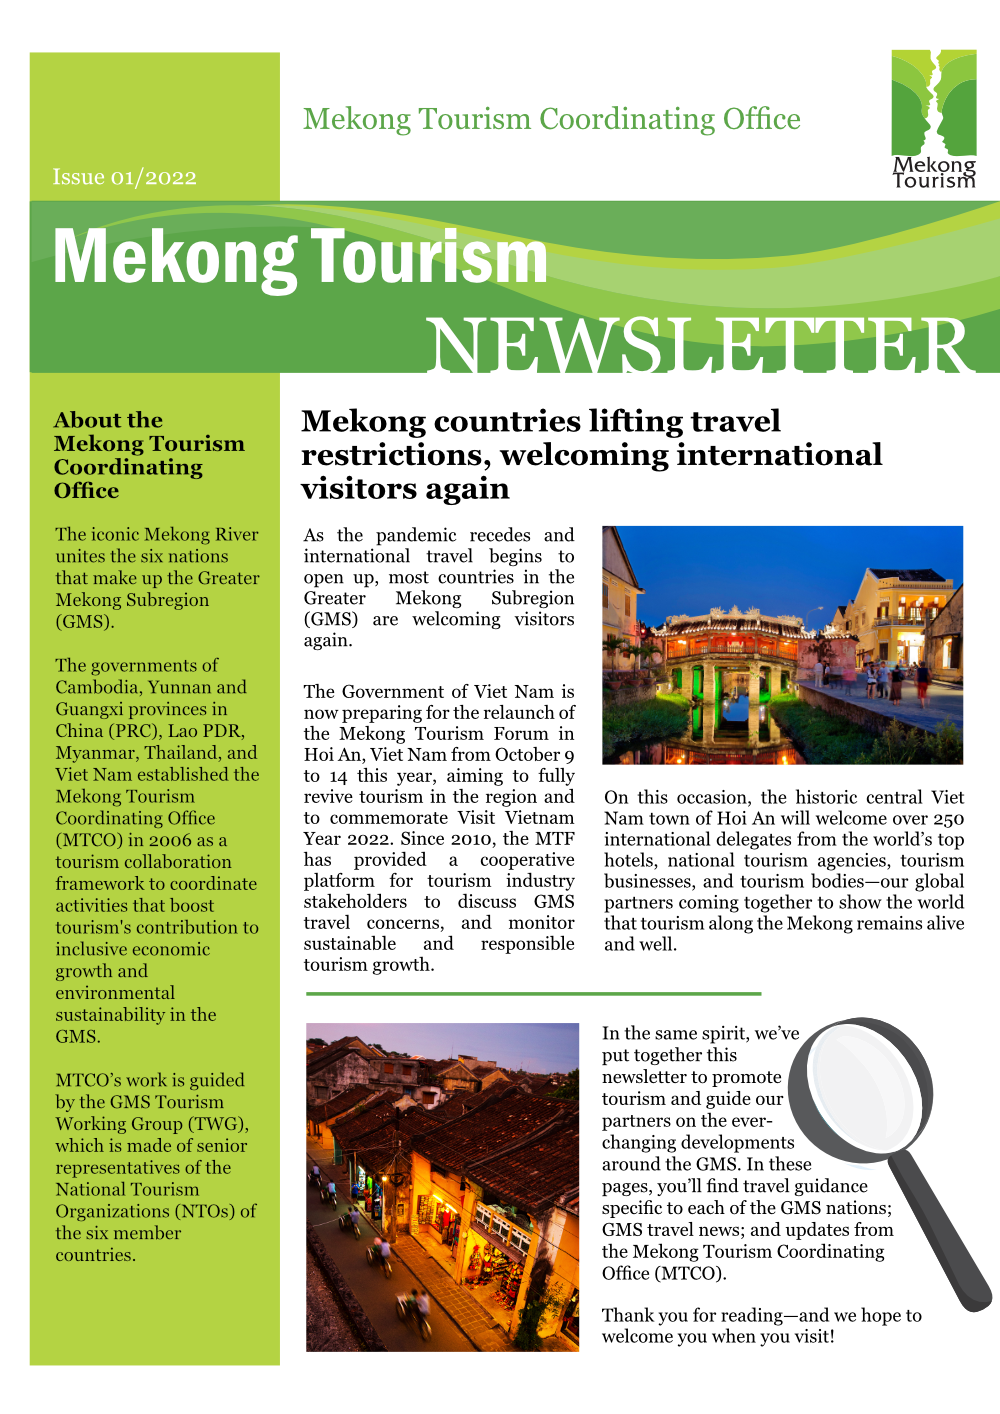 Mekong Tourism Newsletters initiative